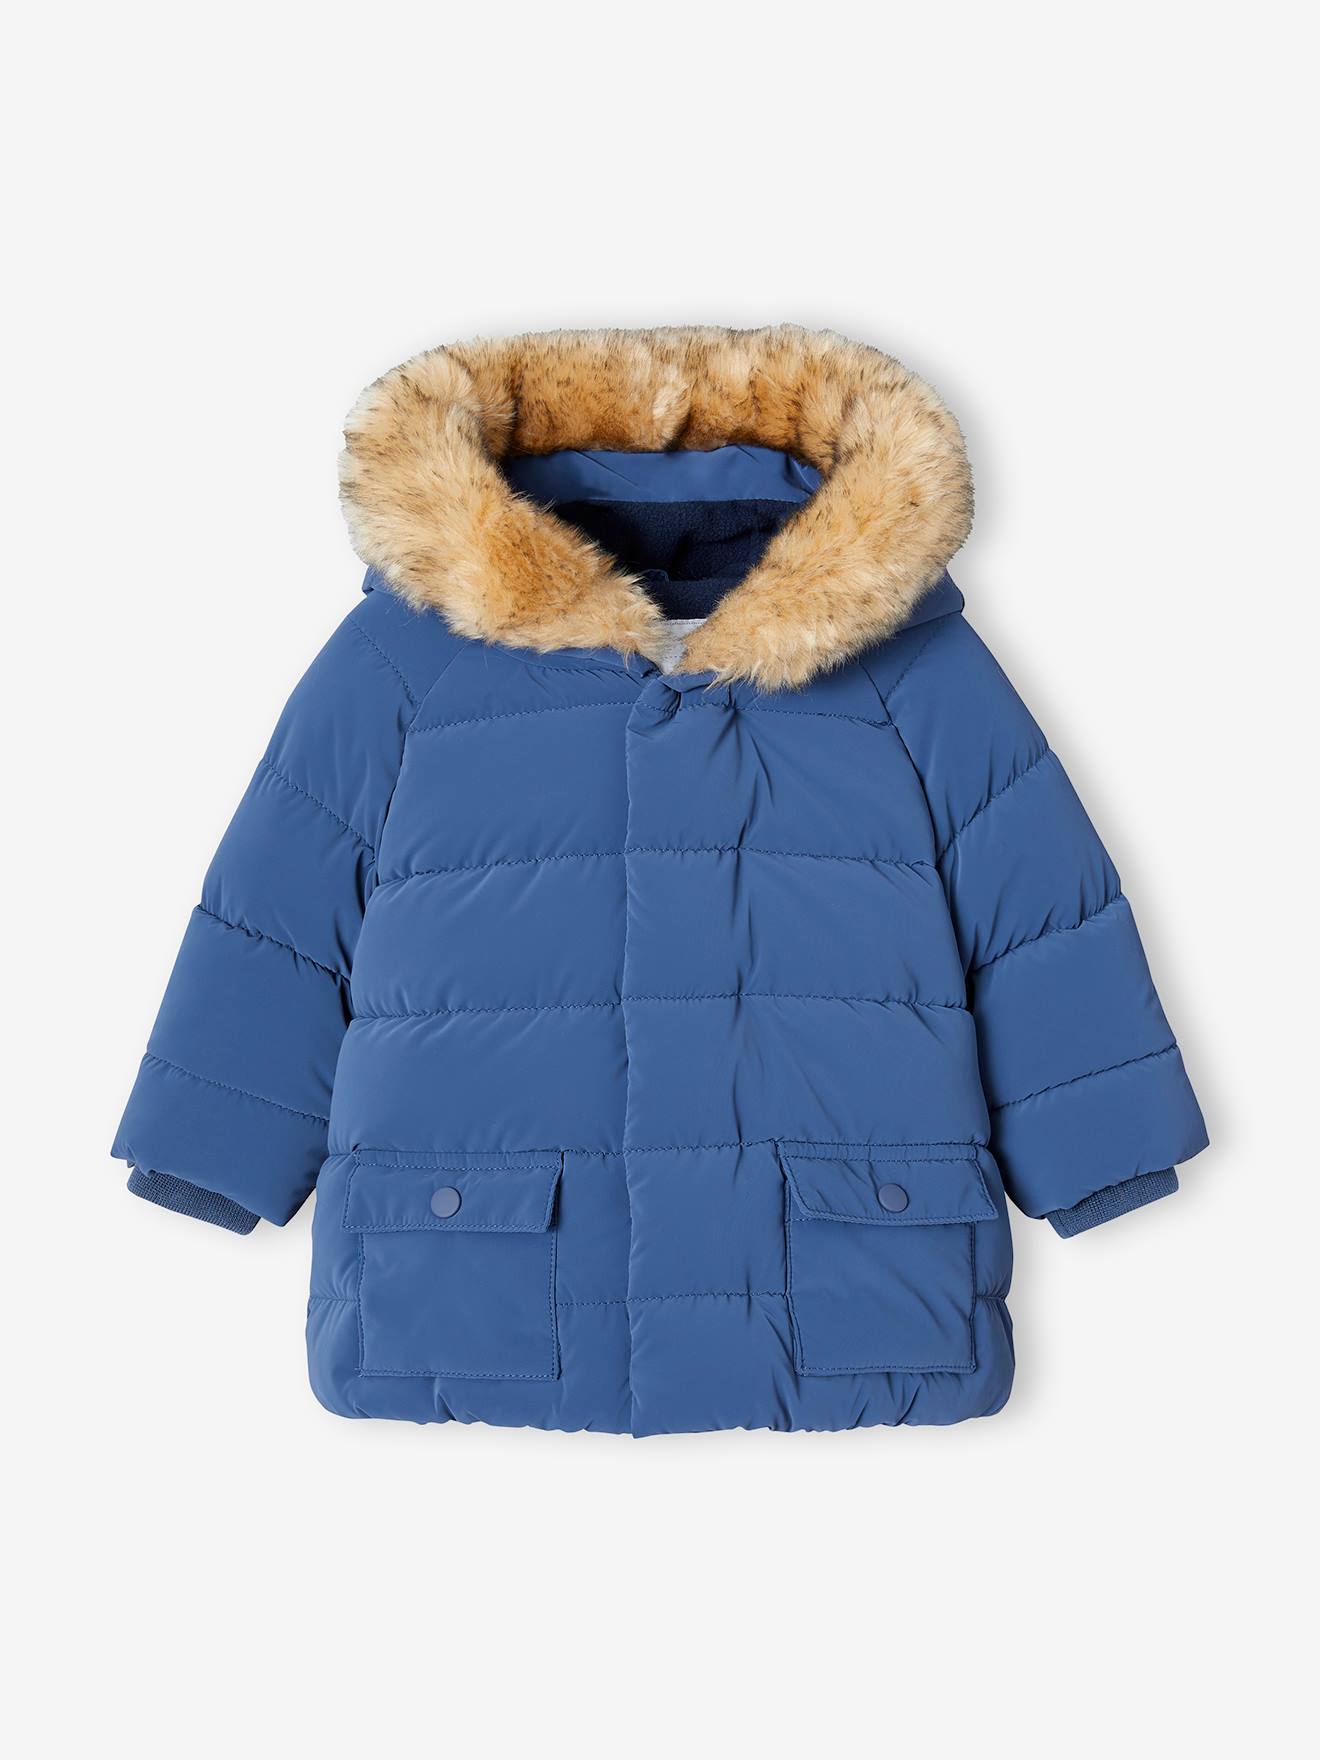 Lined Padded Jacket with Hood for Babies indigo